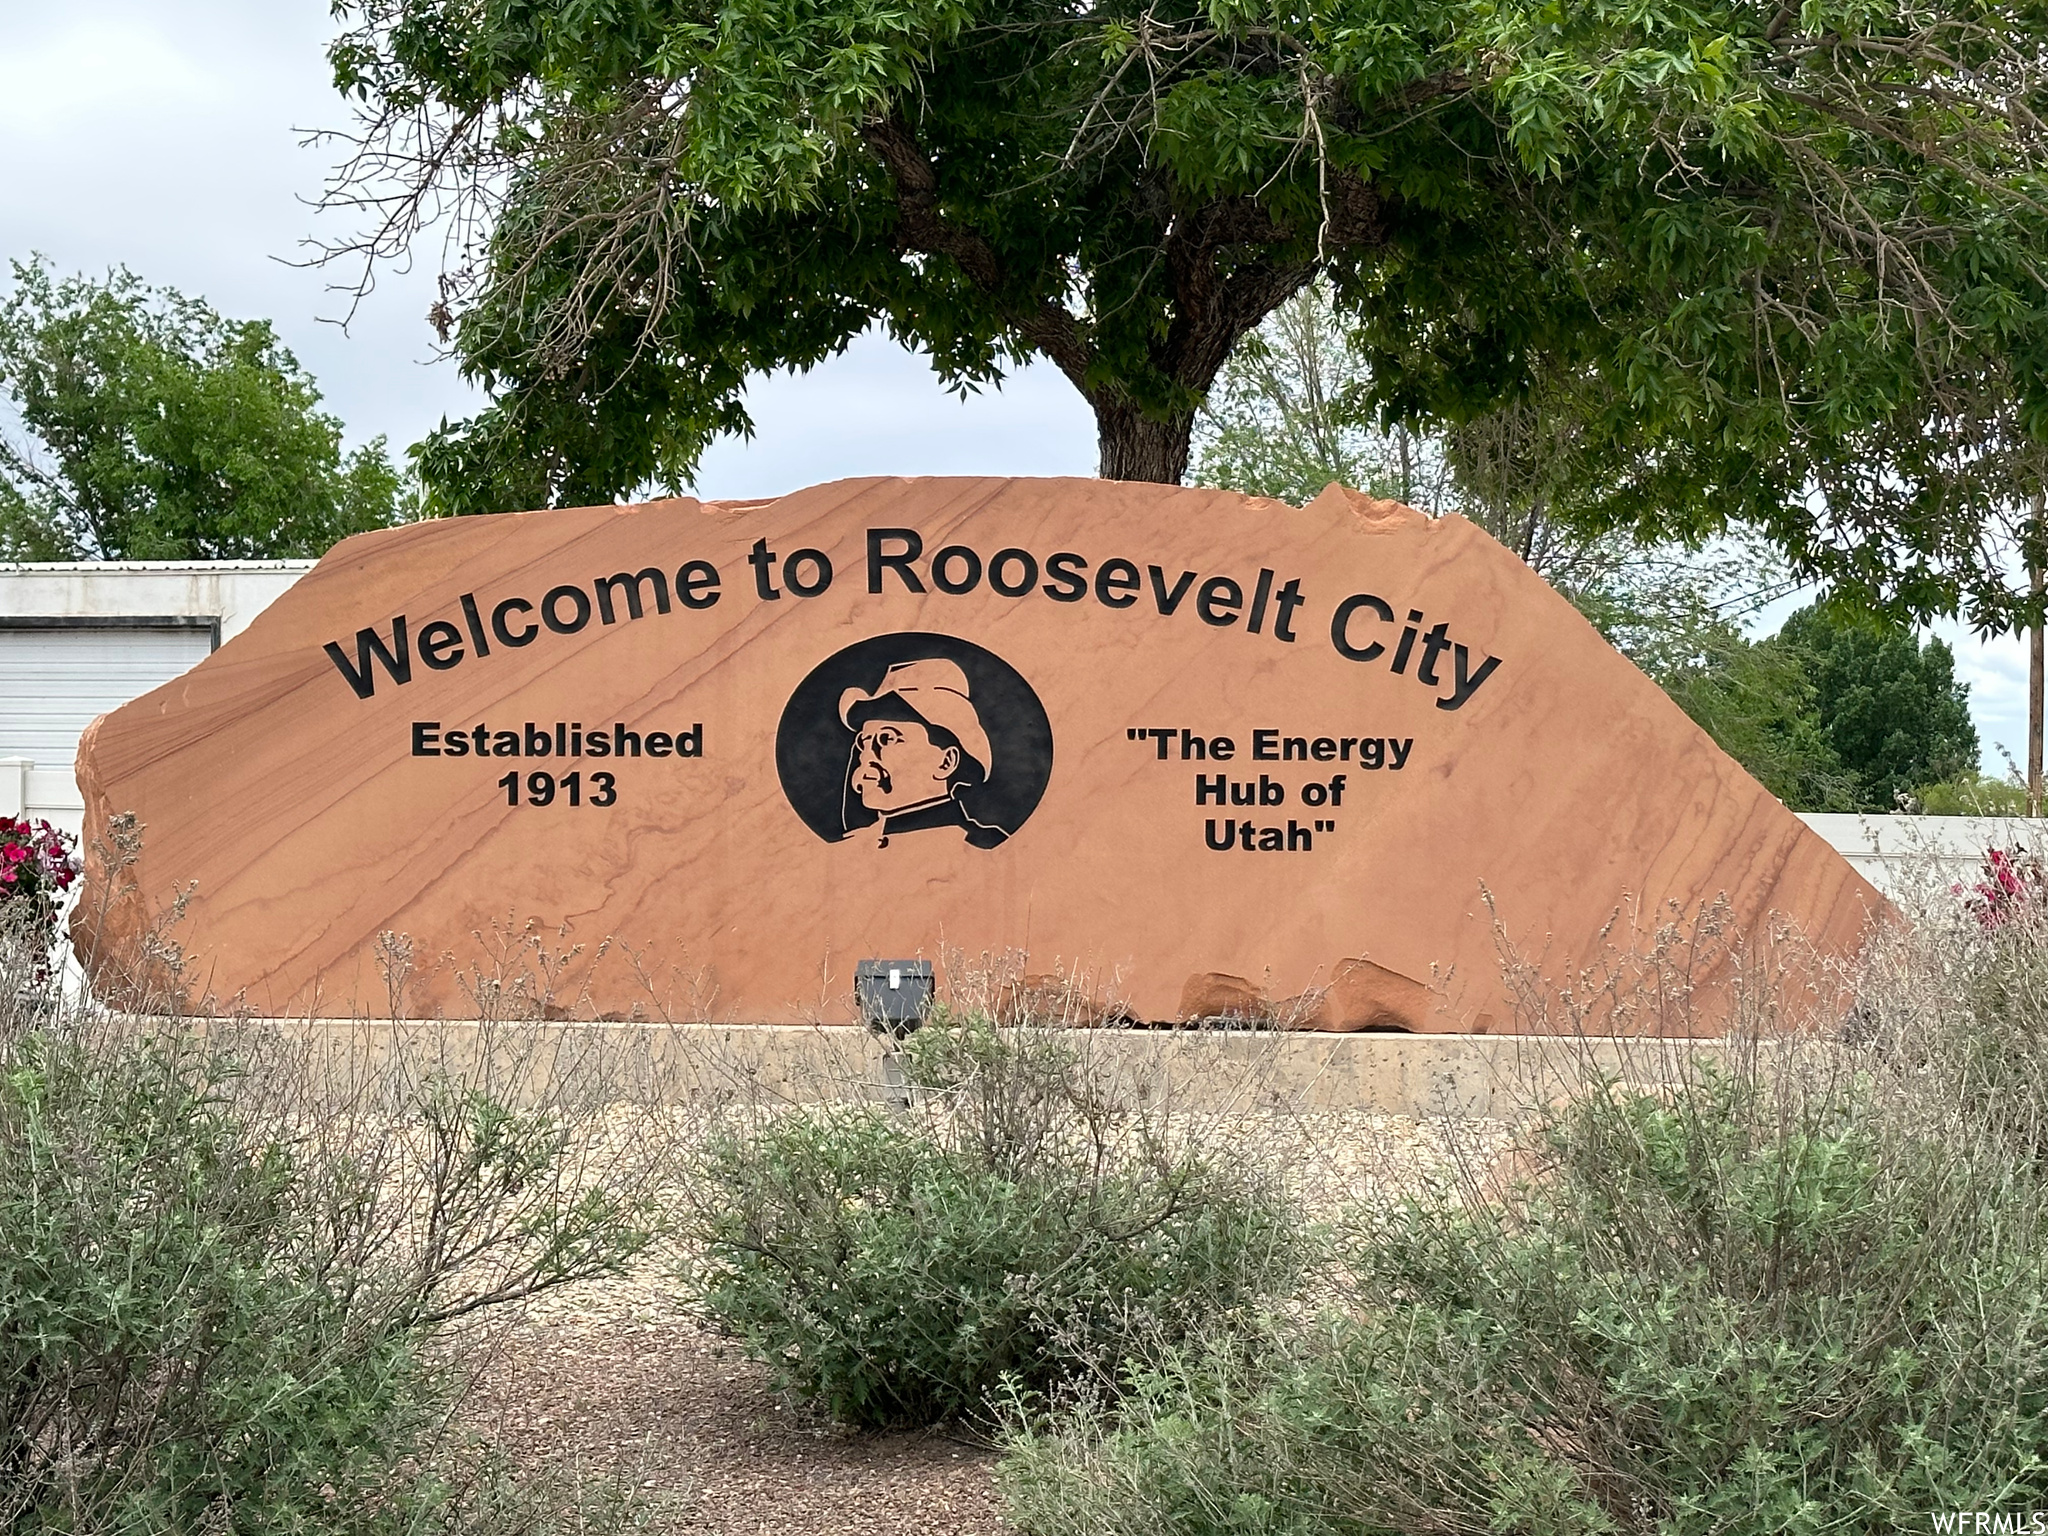 Welcome to Roosevelt.  This  sign is approx. 10 miles from the property.